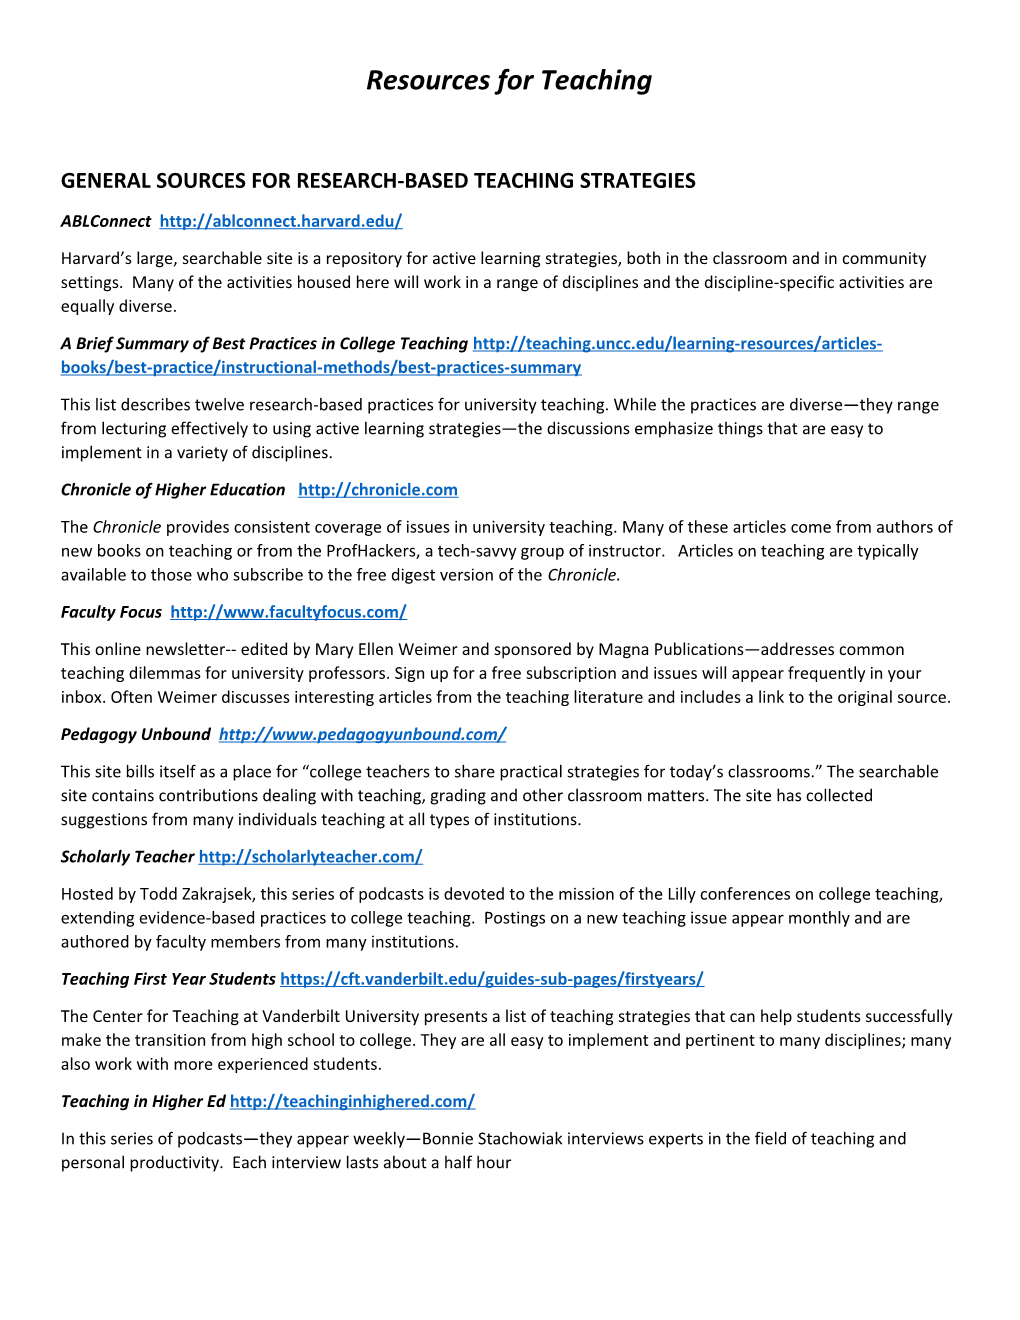 General Sources for Research-Based Teaching Strategies